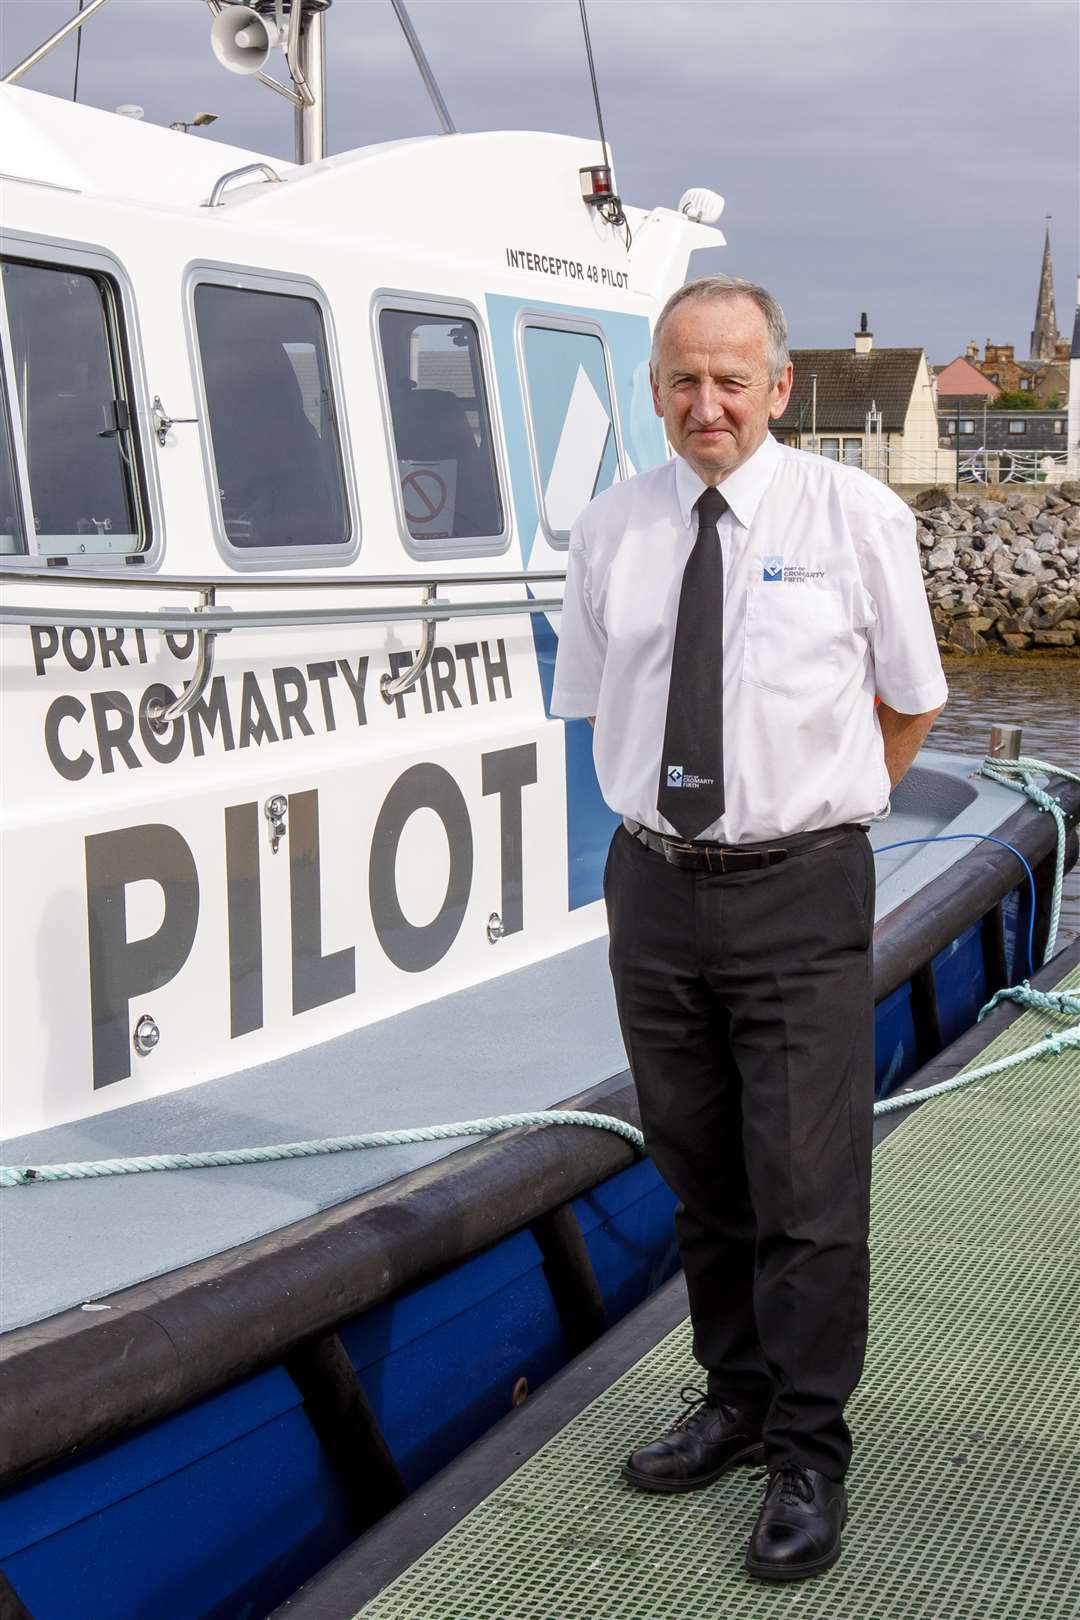 Port of Cromarty Firth marine support manager Graham Grant. Image by: Malcolm McCurrach | | New Wave Images UK | All rights reserved. |www.nwimages.co.uk |